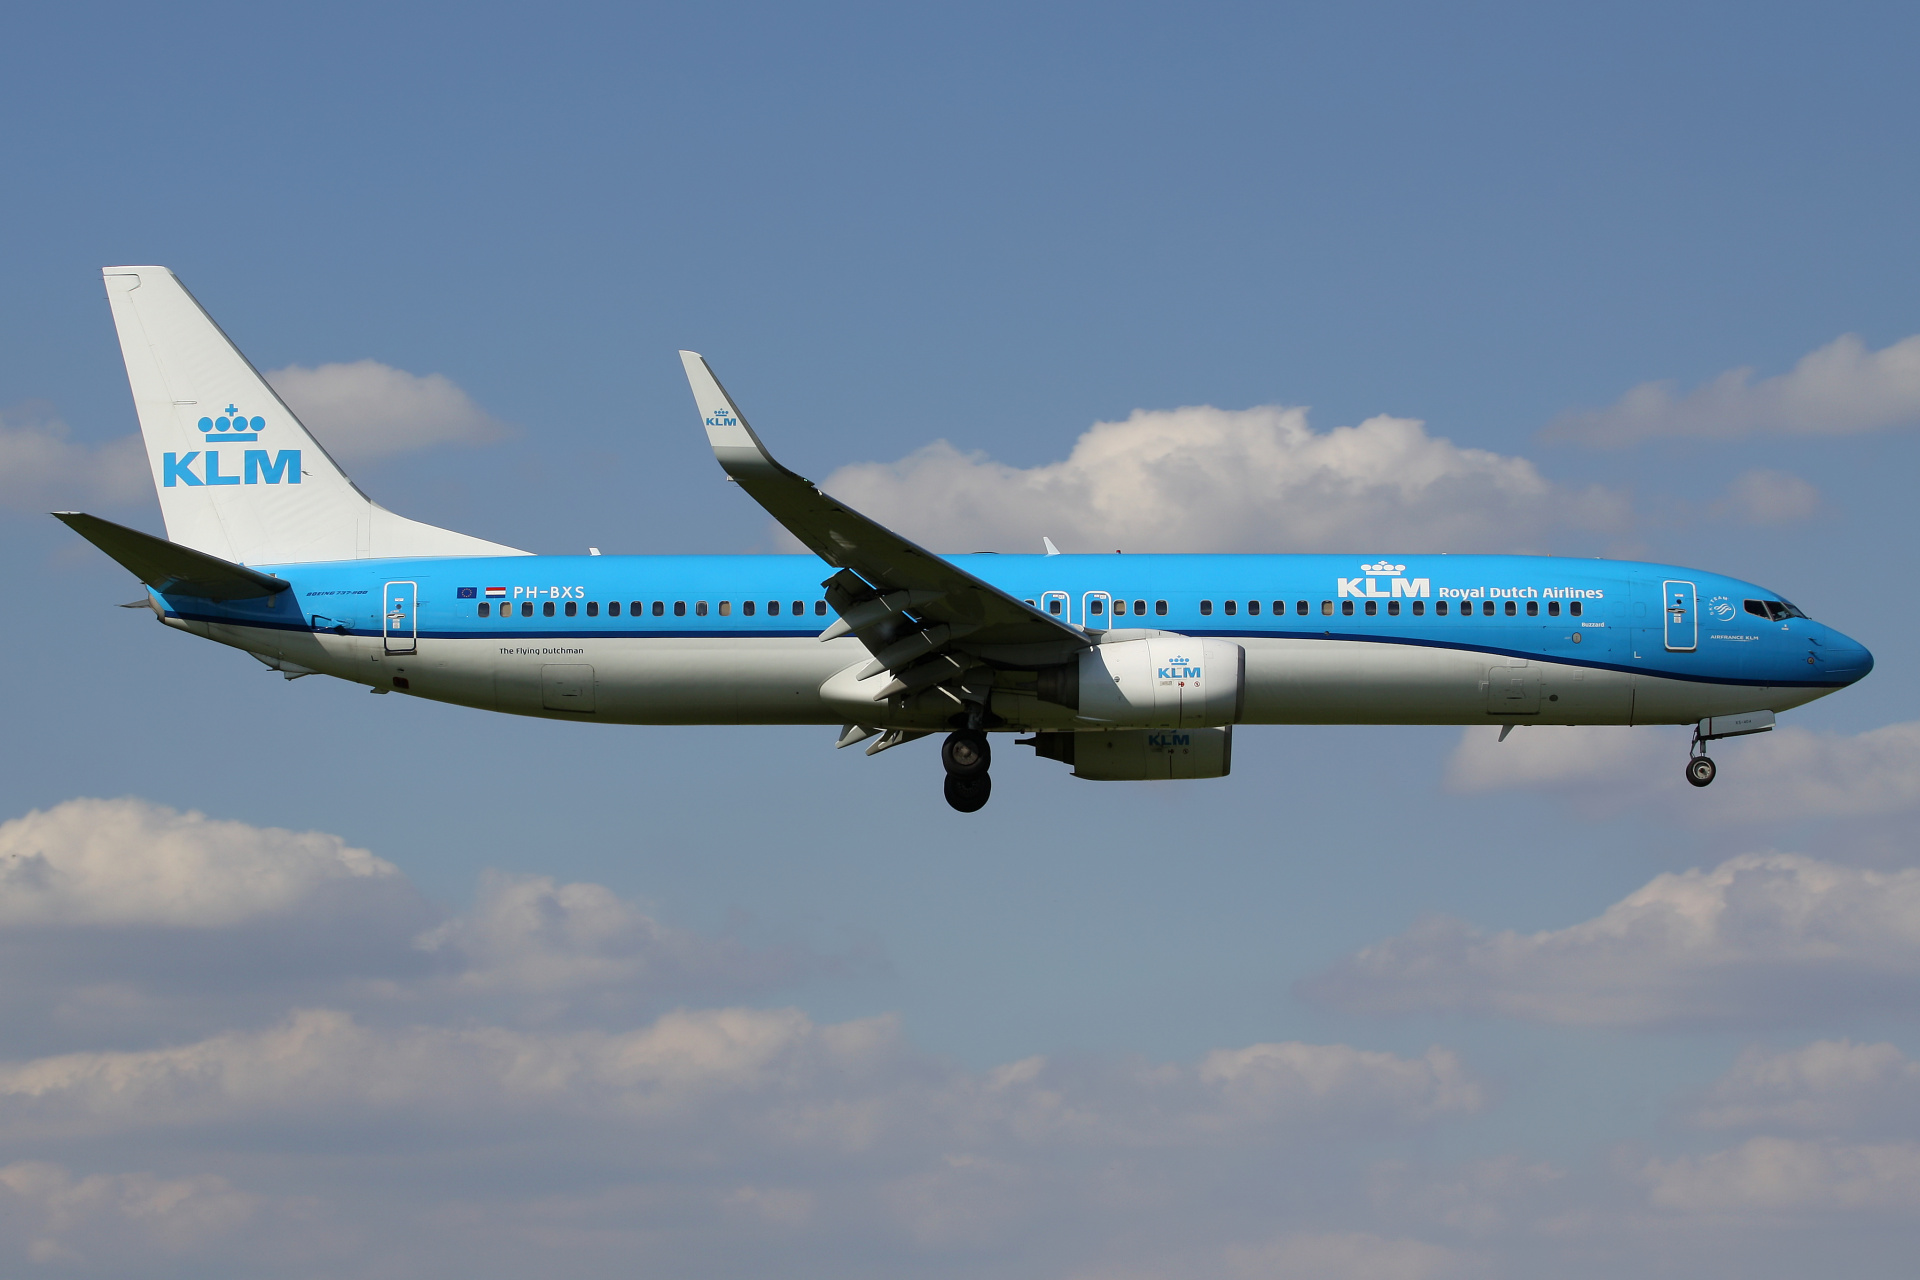 PH-BXS (new livery) (Aircraft » EPWA Spotting » Boeing 737-900 » KLM Royal Dutch Airlines)